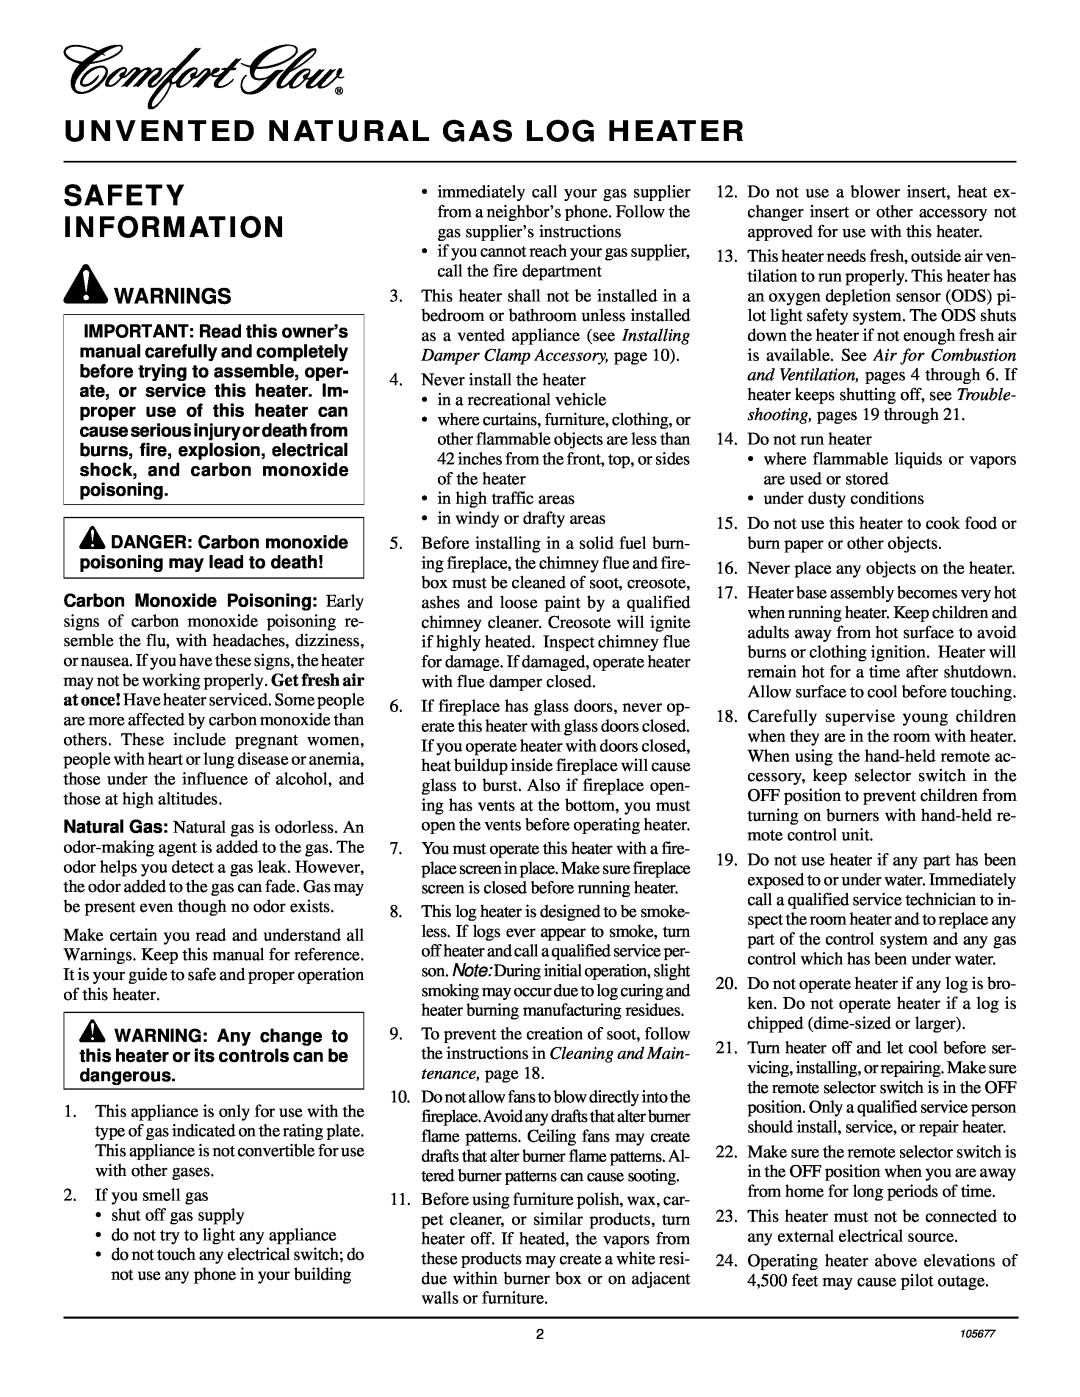 Desa CGB3930NRA, CGD3924NRA, CGB3924NRA installation manual Unvented Natural Gas Log Heater, Safety Information, Warnings 